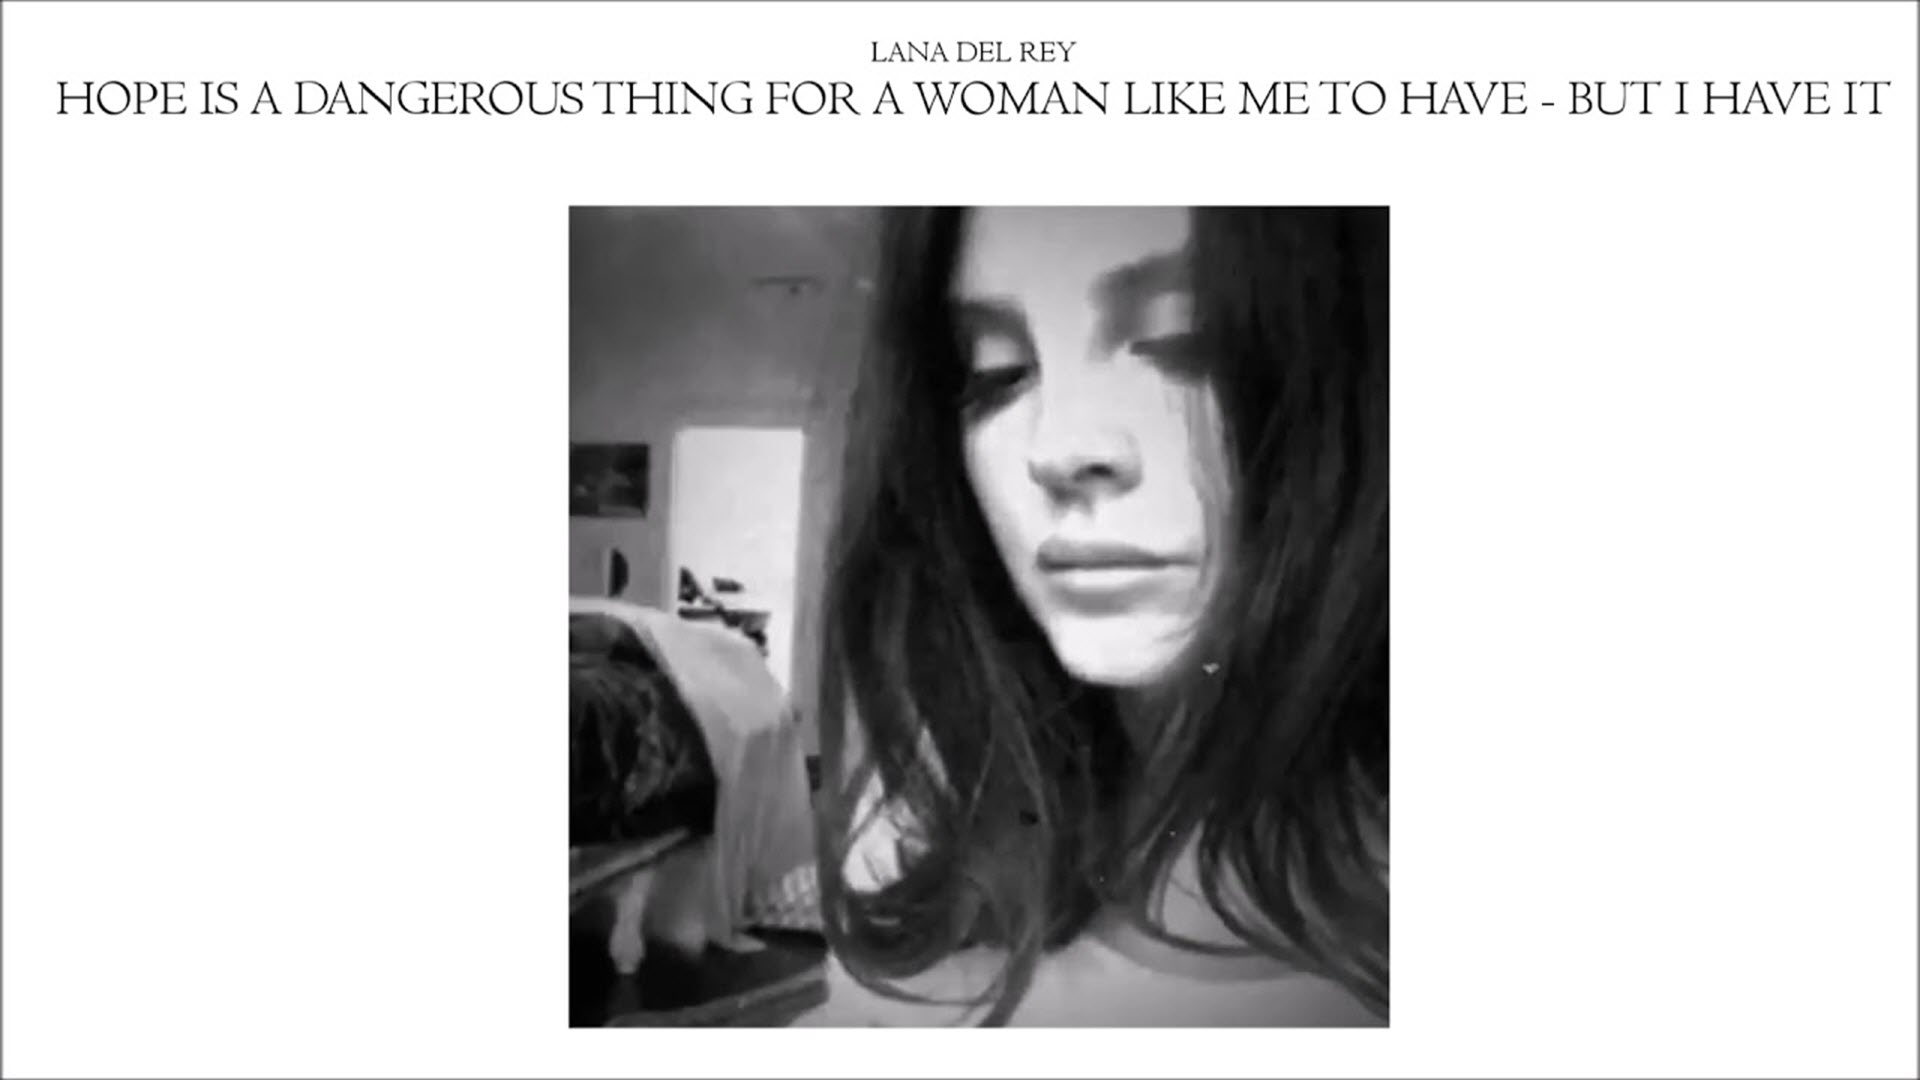 Lana Del Rey “hope is a dangerous thing for a woman like me to have